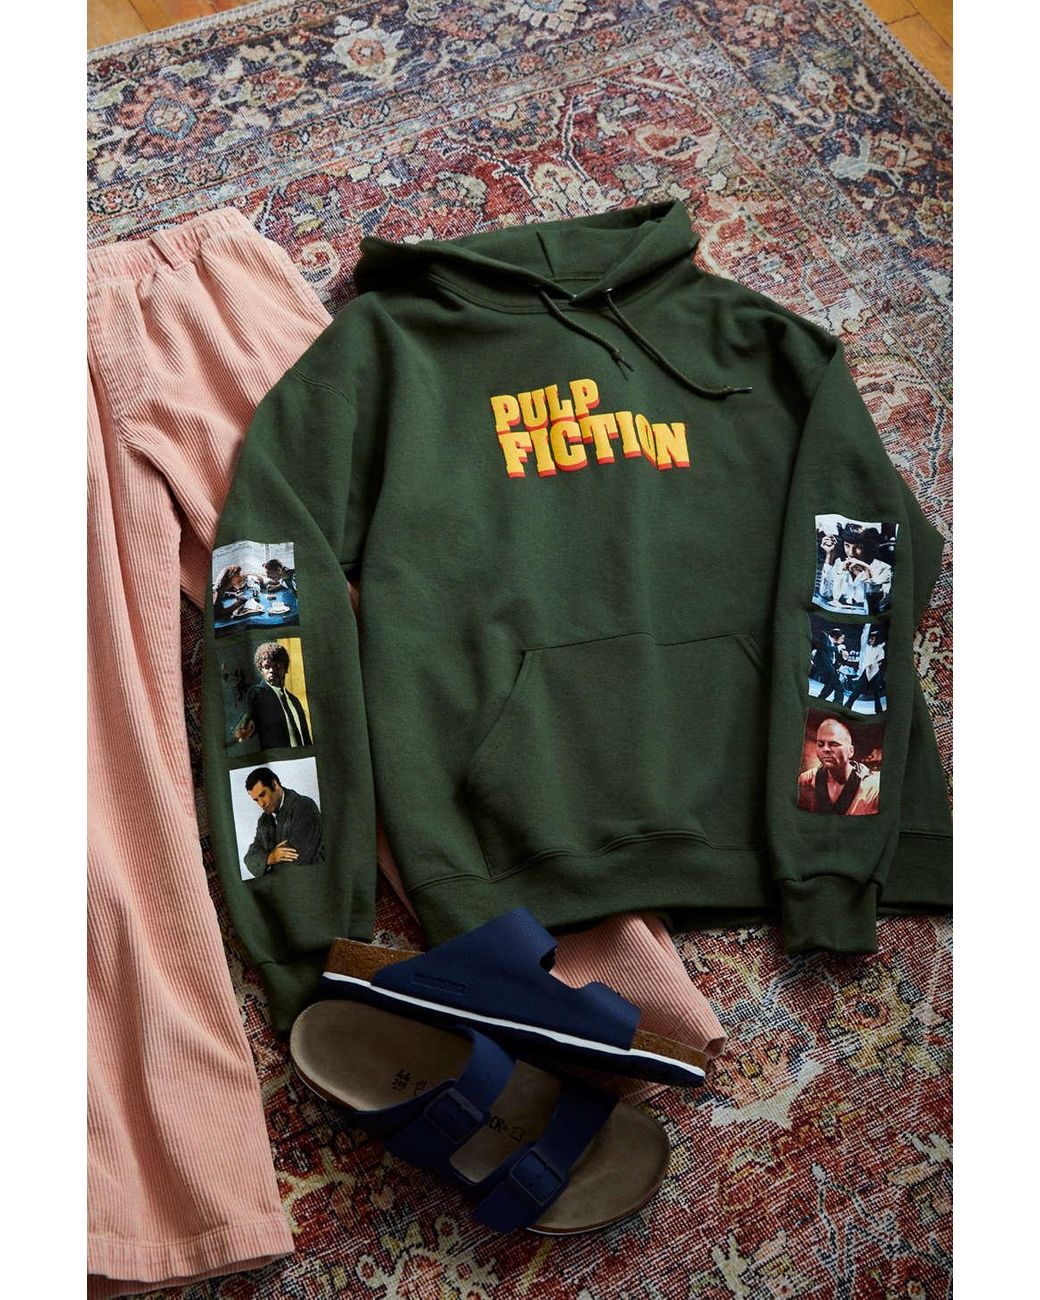 Urban Outfitters Pulp Fiction Puff Print Hoodie Sweatshirt in Green for Men  | Lyst